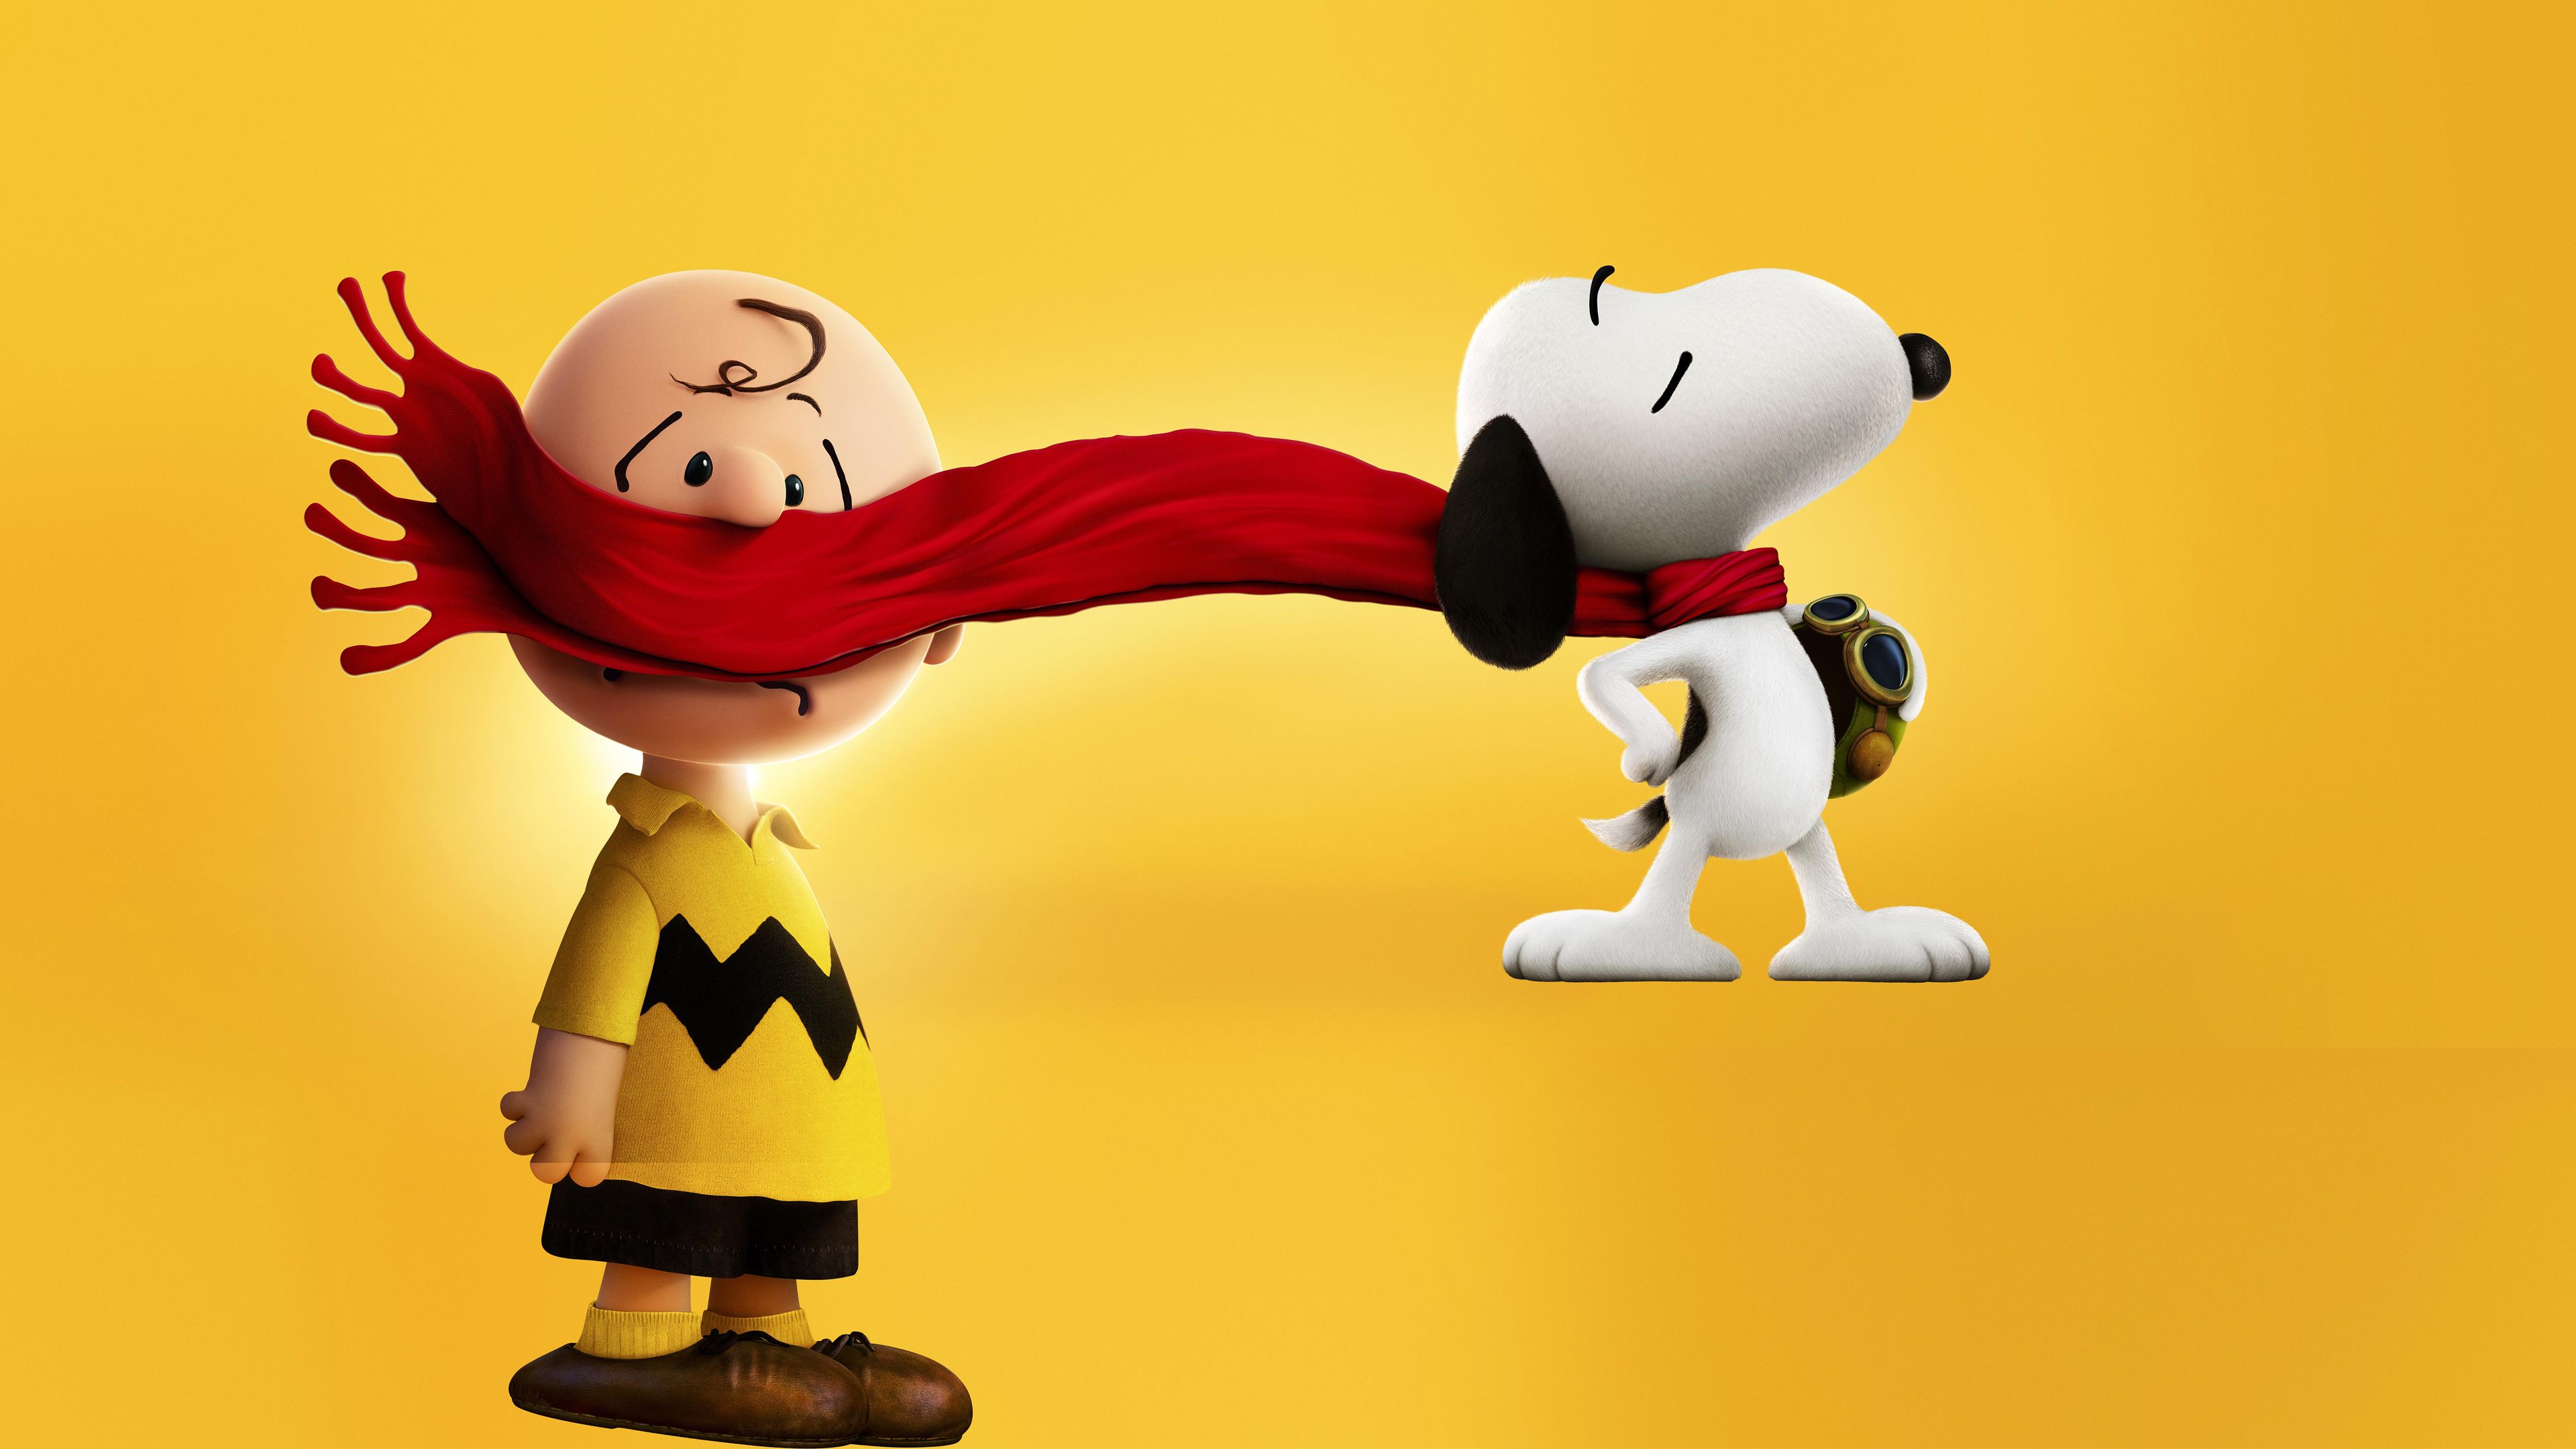 Snoopy 4K wallpaper for your desktop or mobile screen free and easy to download